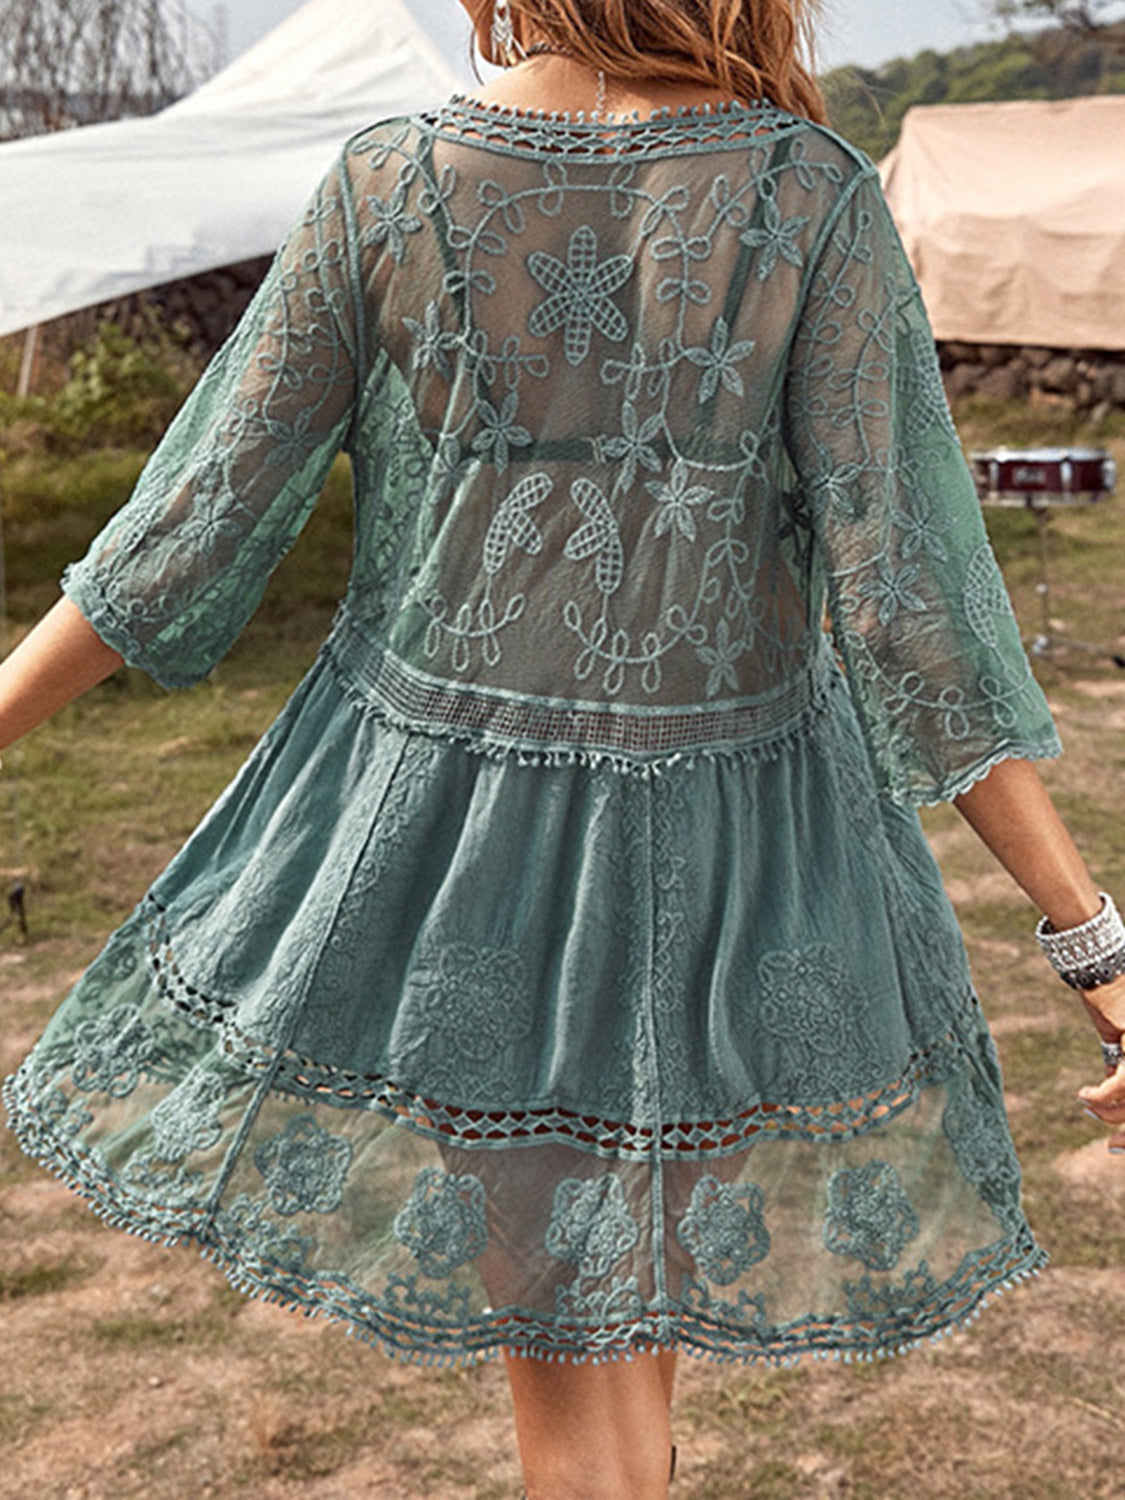 Lace Detail Plunge Cover-Up Dress-Krush Kandy, Women's Online Fashion Boutique Located in Phoenix, Arizona (Scottsdale Area)